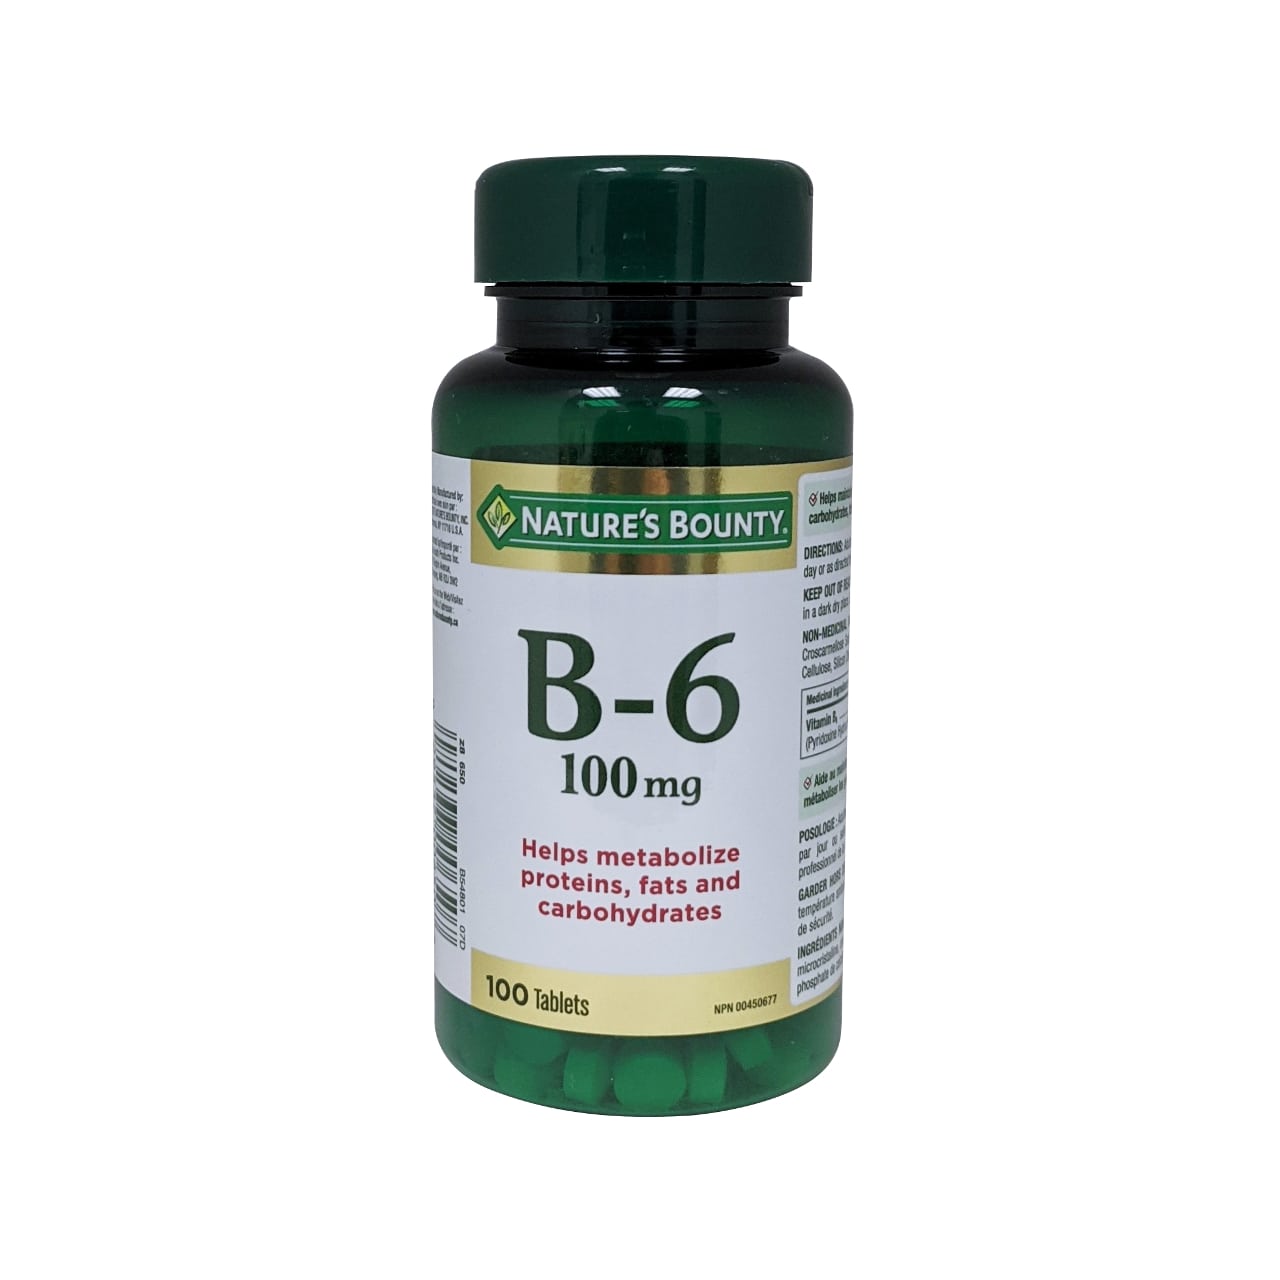 Product label for Nature's Bounty Vitamin B6 100mg in English